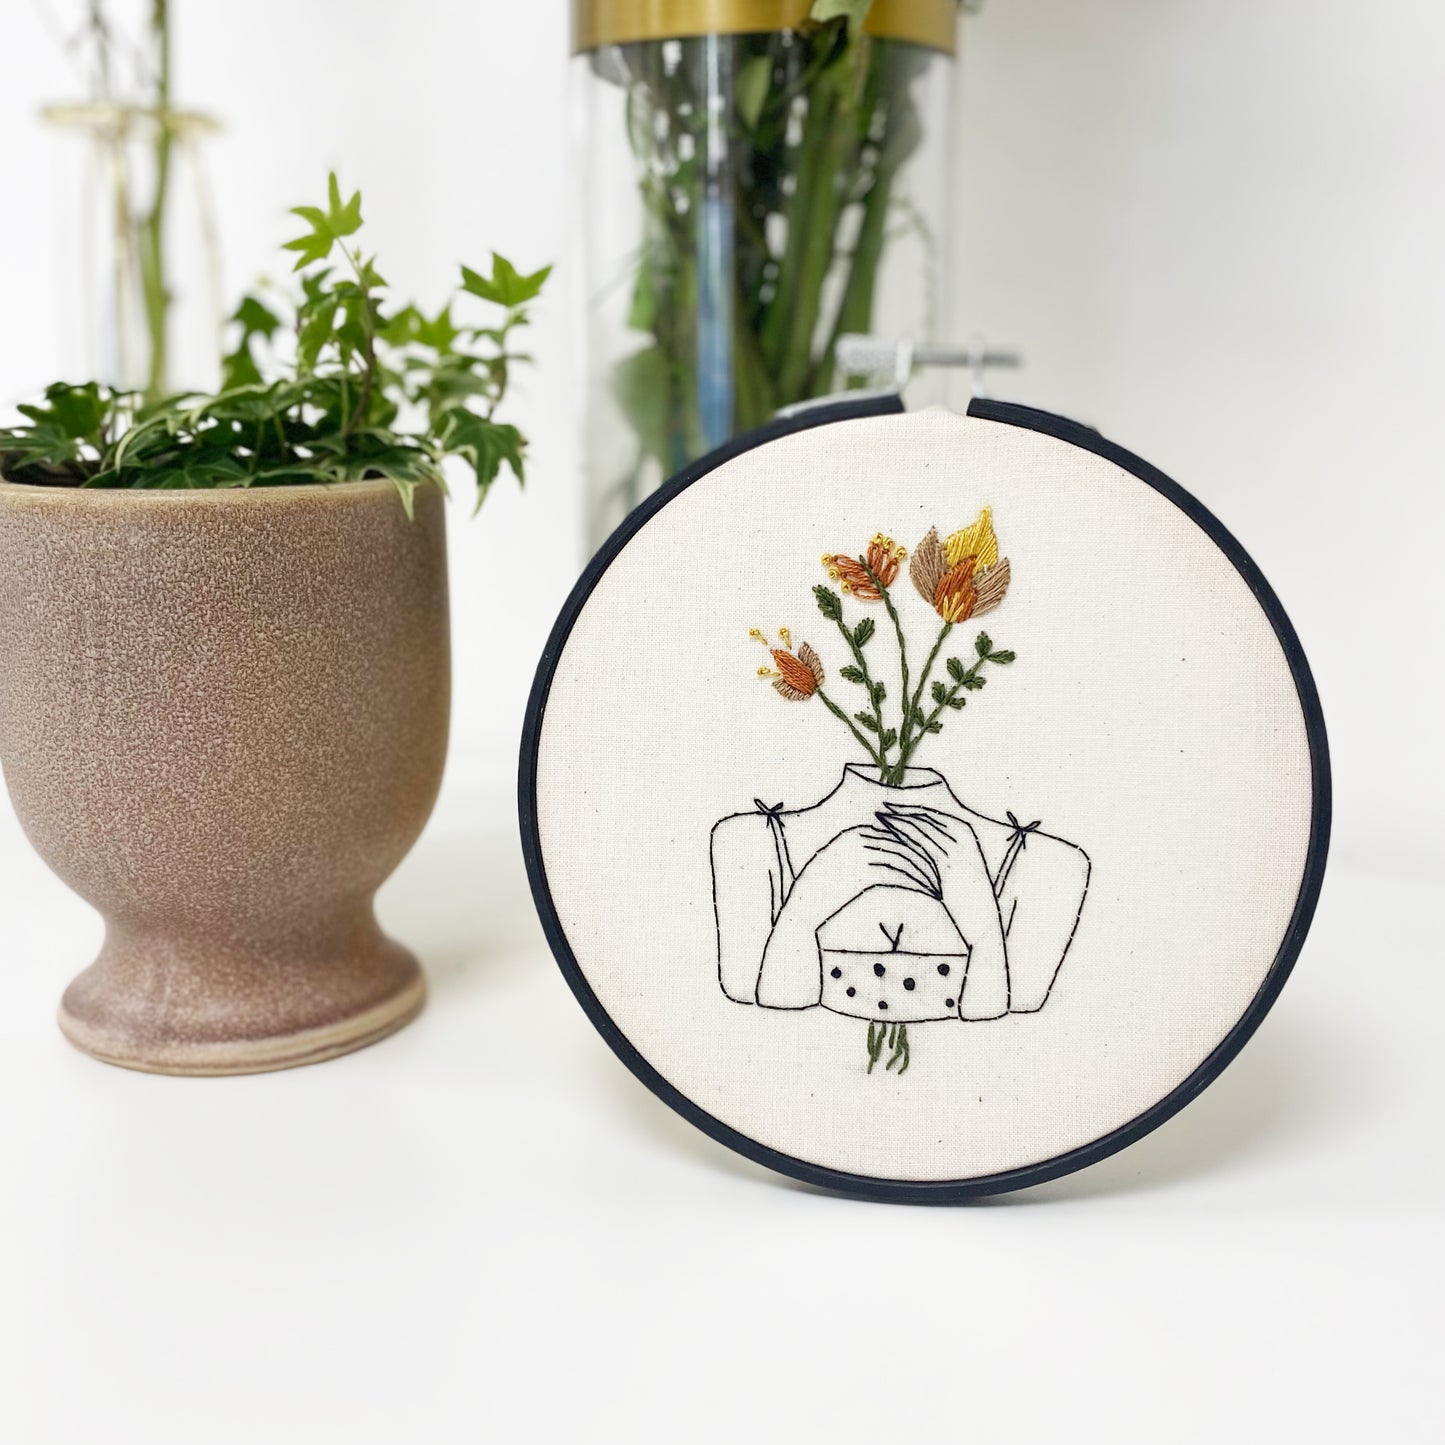 Female Growth DIY Embroidery Kit